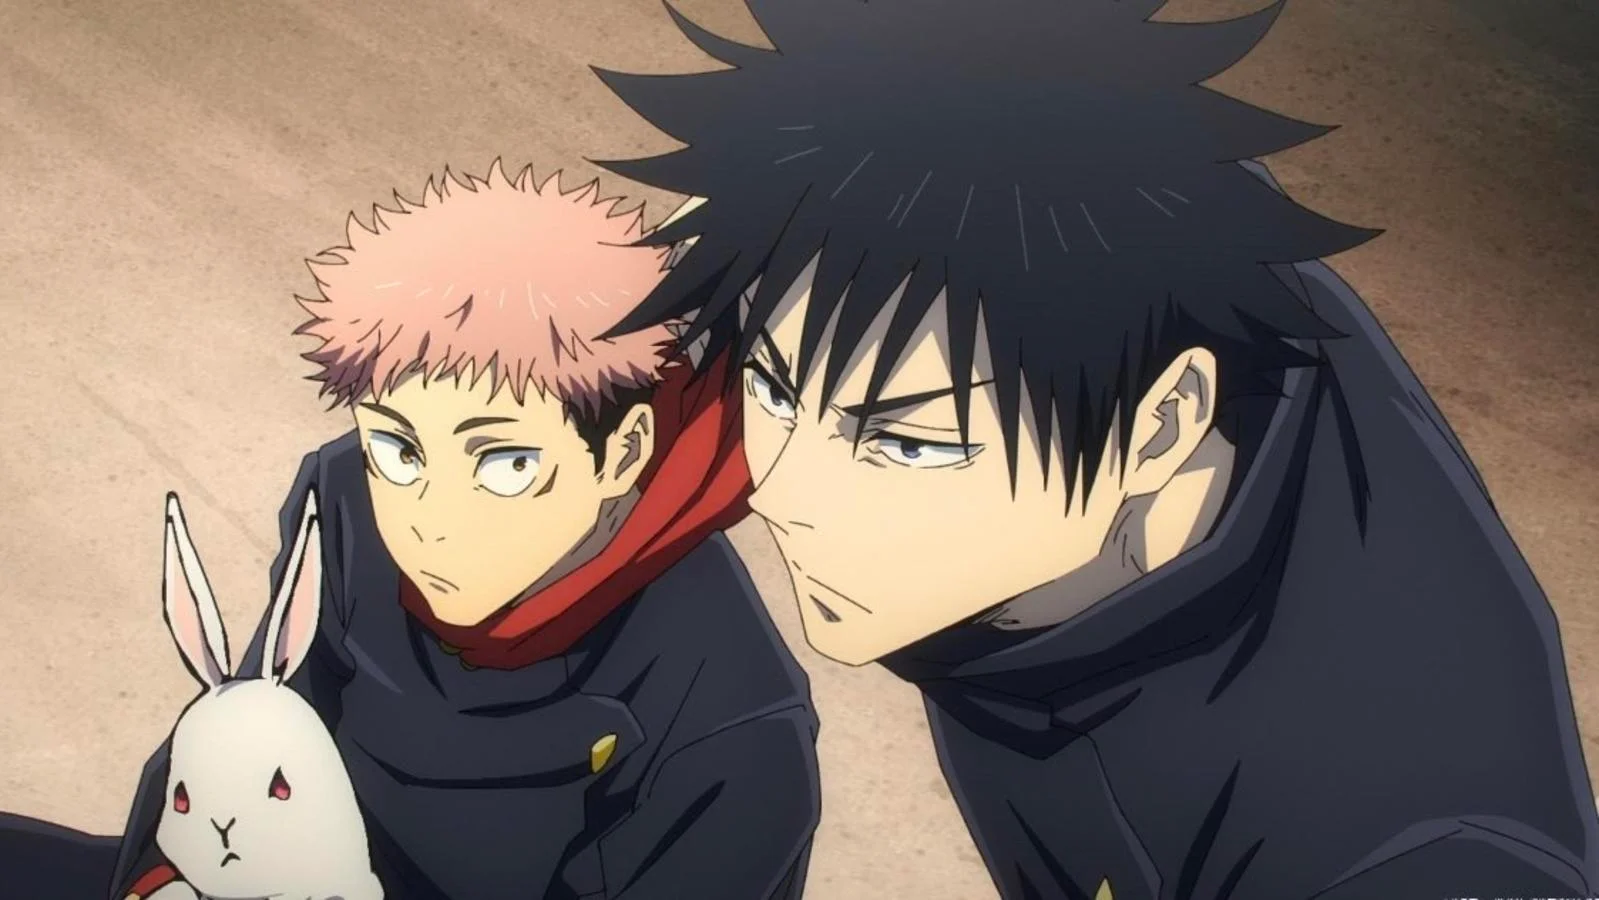 Exciting Update When Will 'Jujutsu Kaisen Season 3' Hit the Screens Fans Eager for 2026-2027 Release--